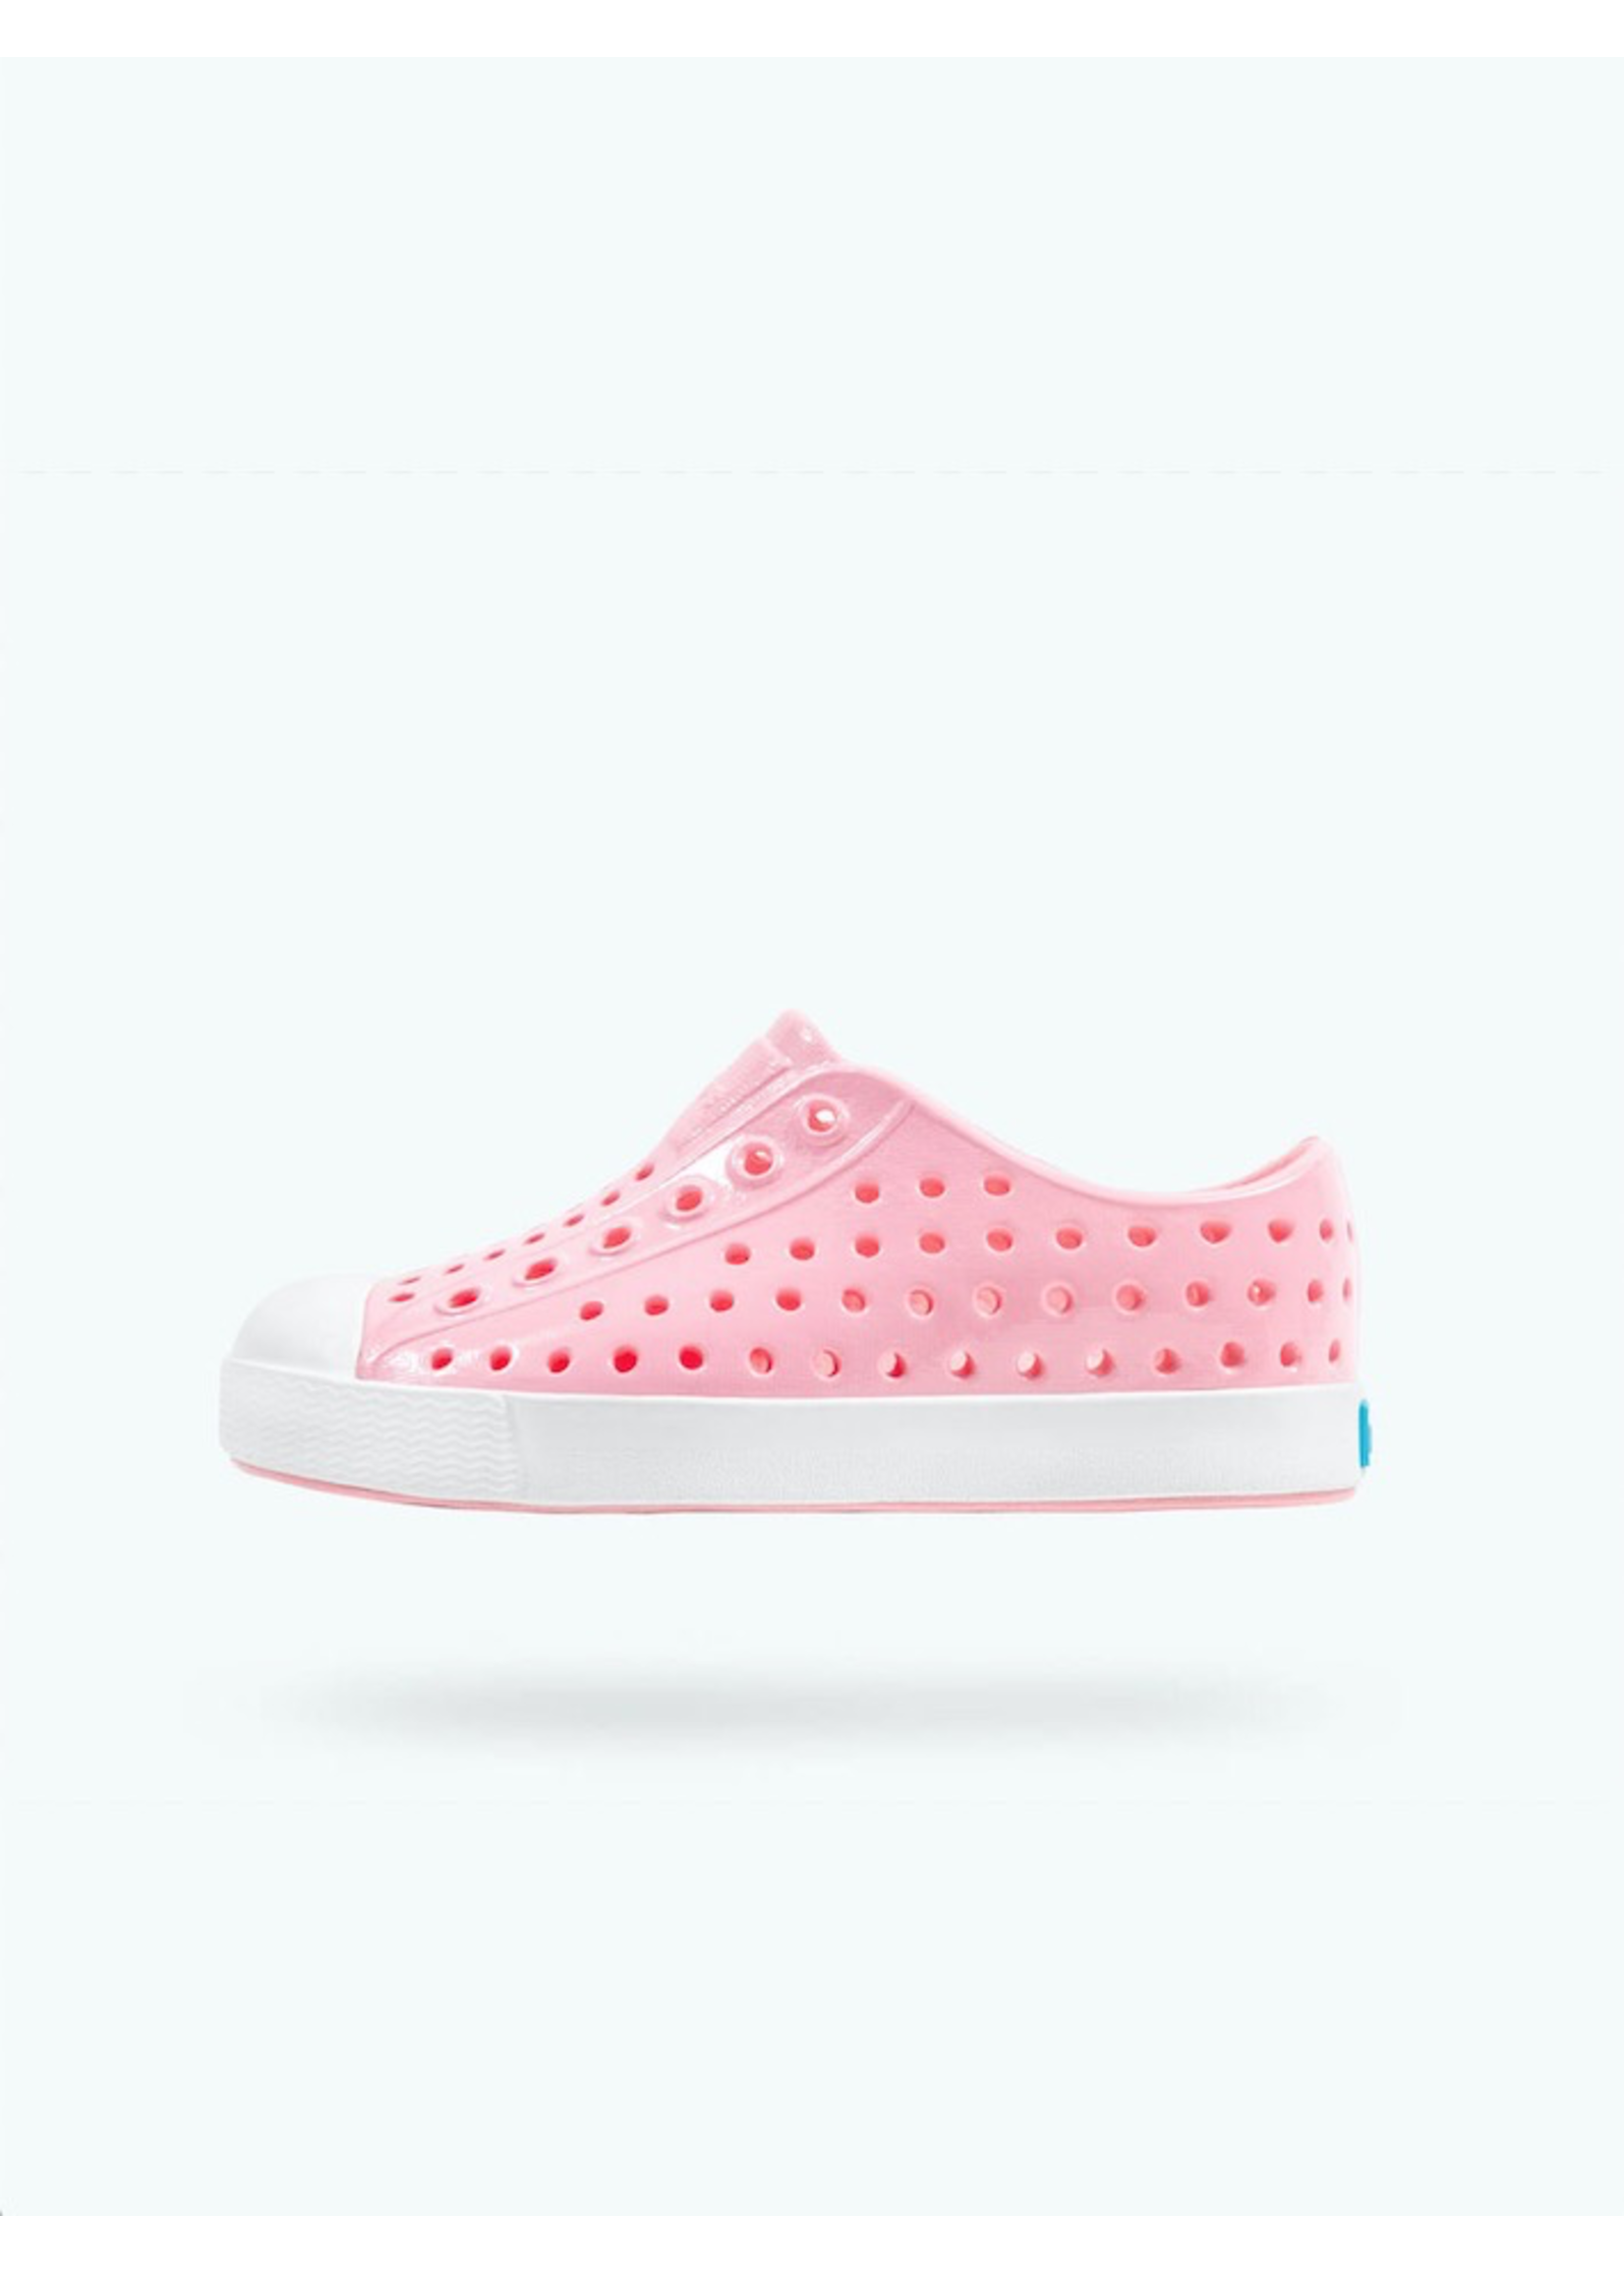 Native Shoes Native Shoes, Jefferson Gloss Child in Princess Pink